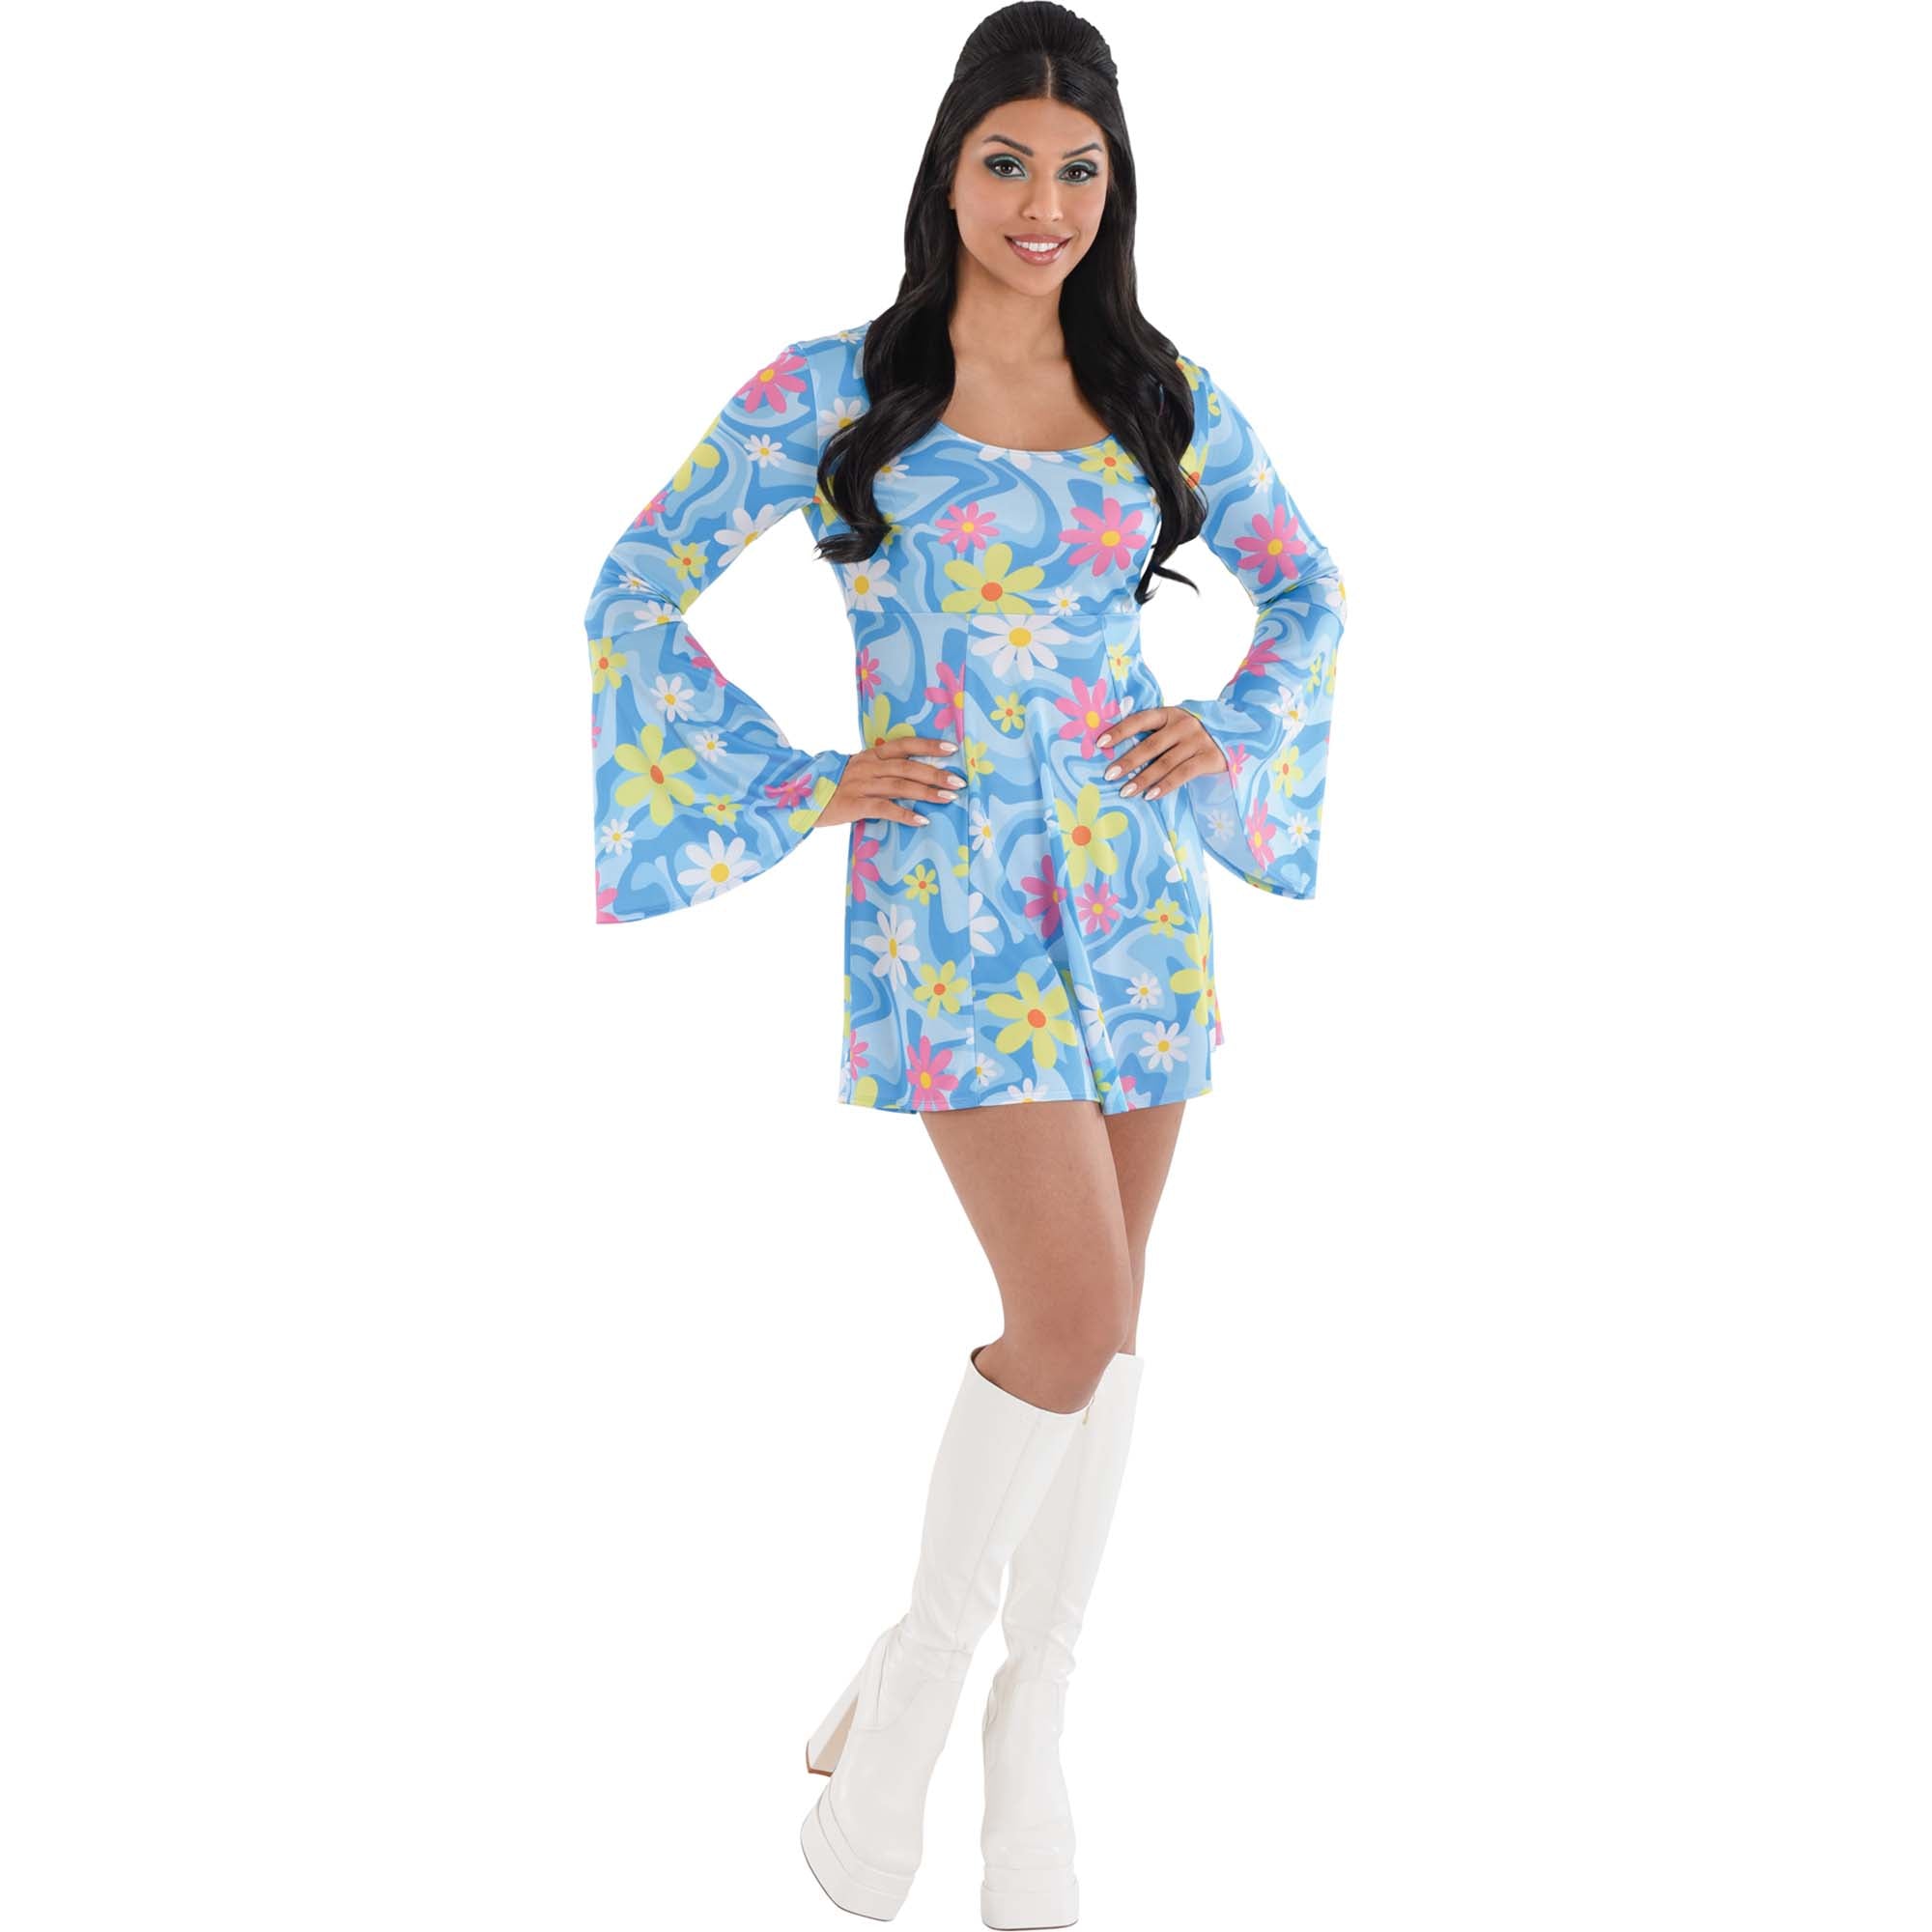 60s Hippie Mini Dress for Adults, Blue Floral Dress | Party Expert